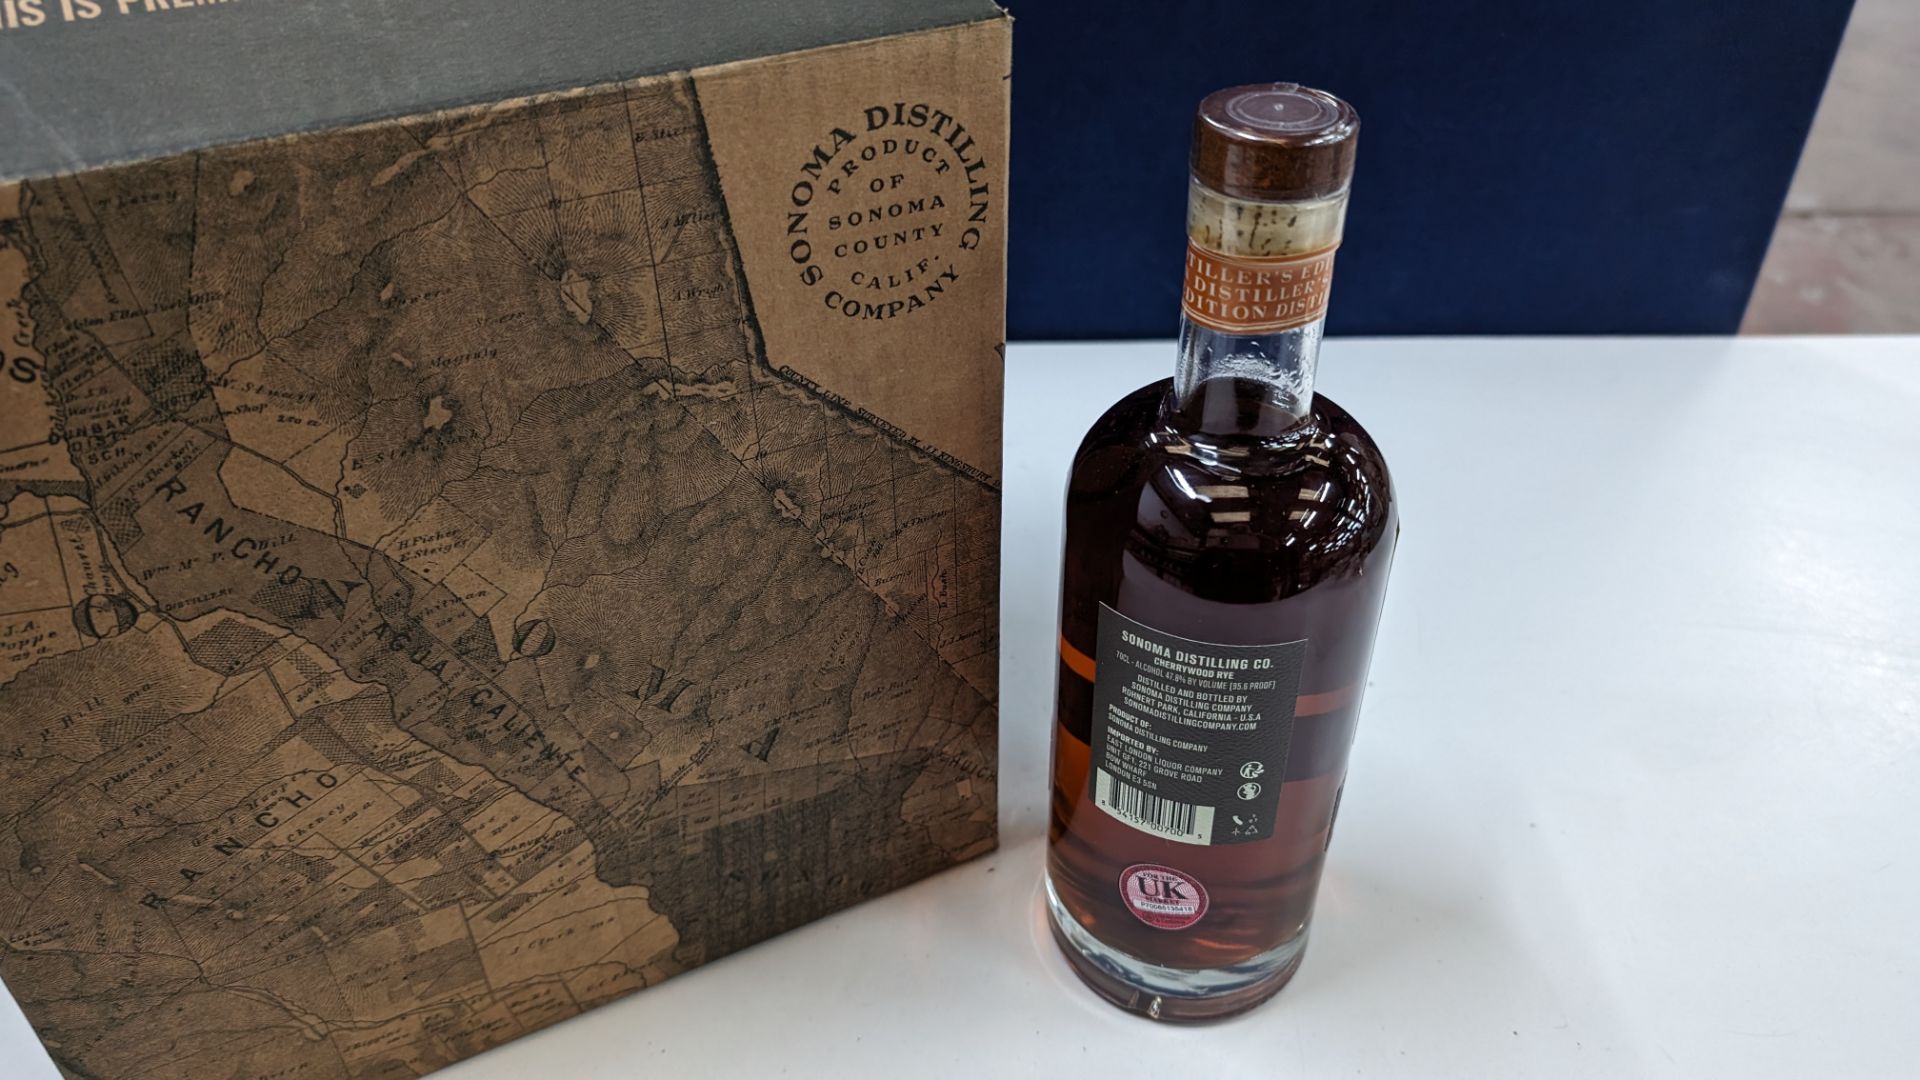 6 off 700ml bottles of Sonoma Cherrywood Rye Whiskey. In Sonoma branded box which includes bottling - Image 7 of 8